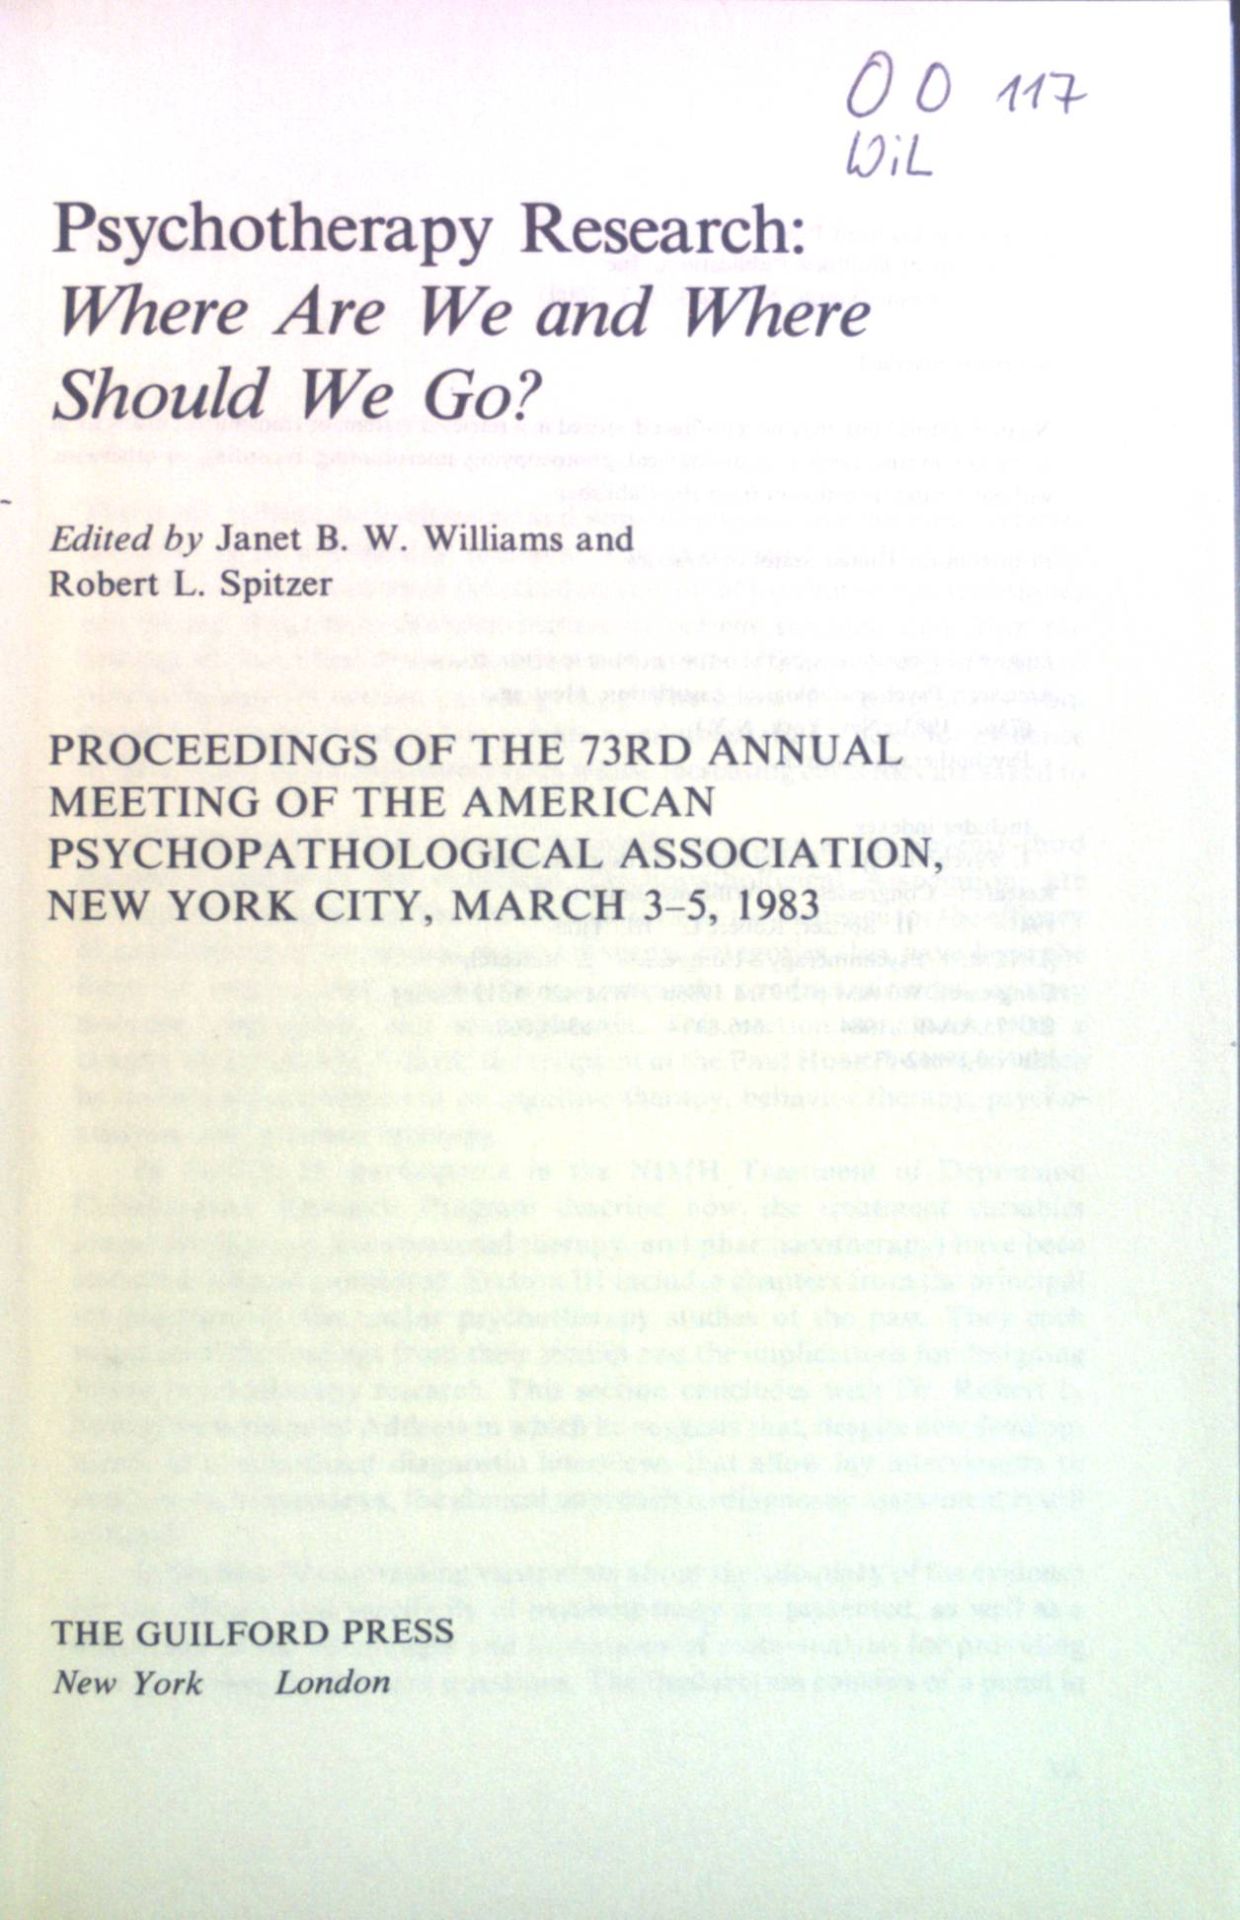 Psychotherapy Research: Where Are We and Where Should We Go? Proceedings of the 73rd Annual Meeting of the American Psychopathological Association, New York City, March 3-5, 1983. - Williams, Janet B. W. and Robert L. Spitzer